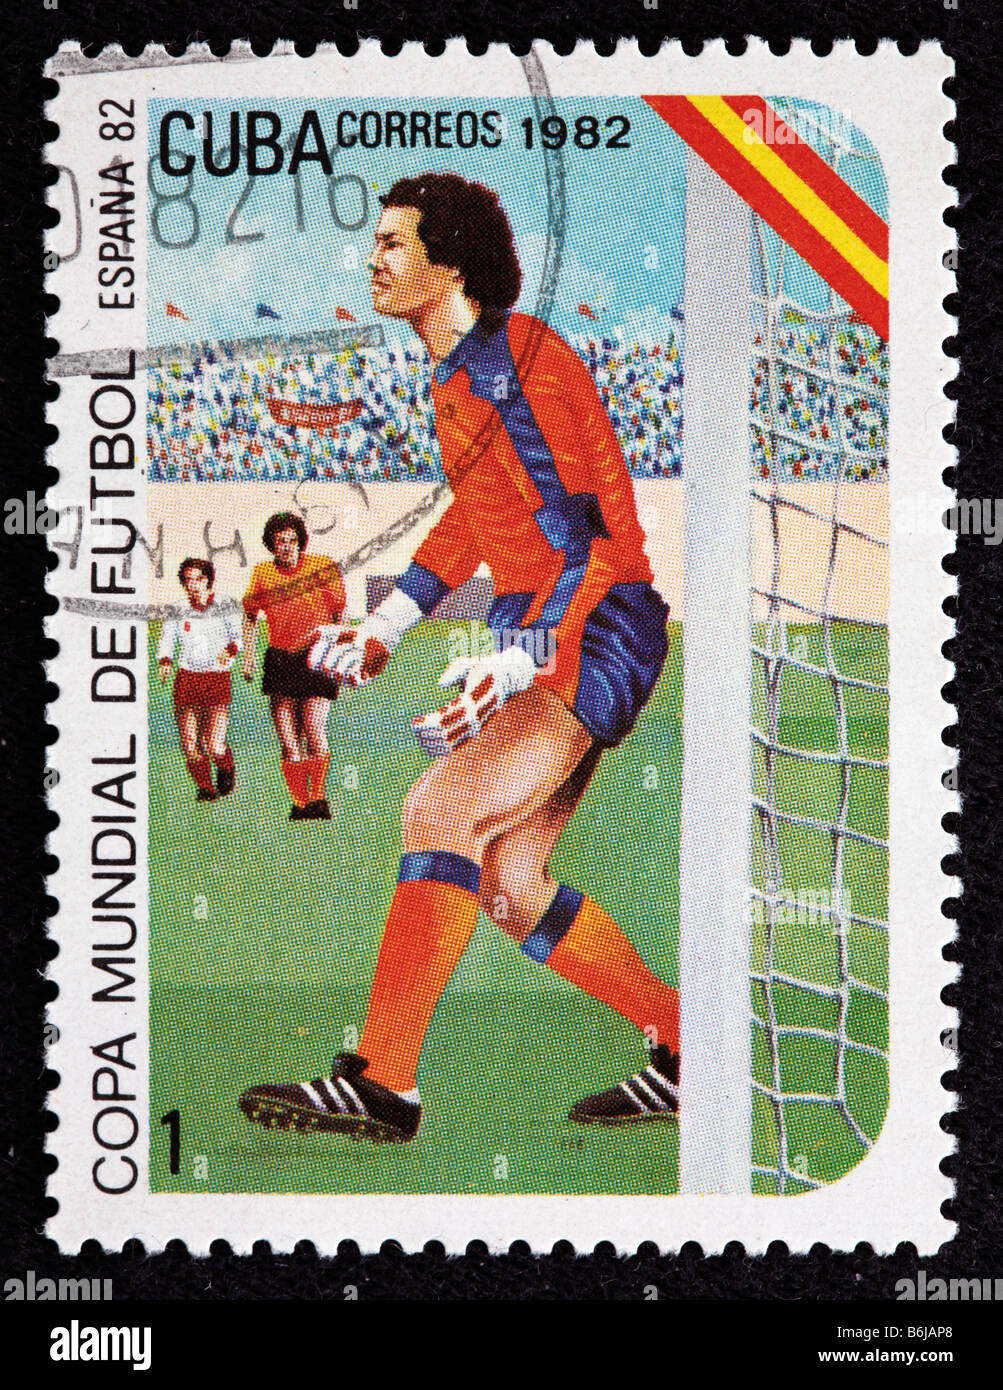 1982 FIFA World Cup, Spain, postage stamp, Cuba, 1982 Stock Photo